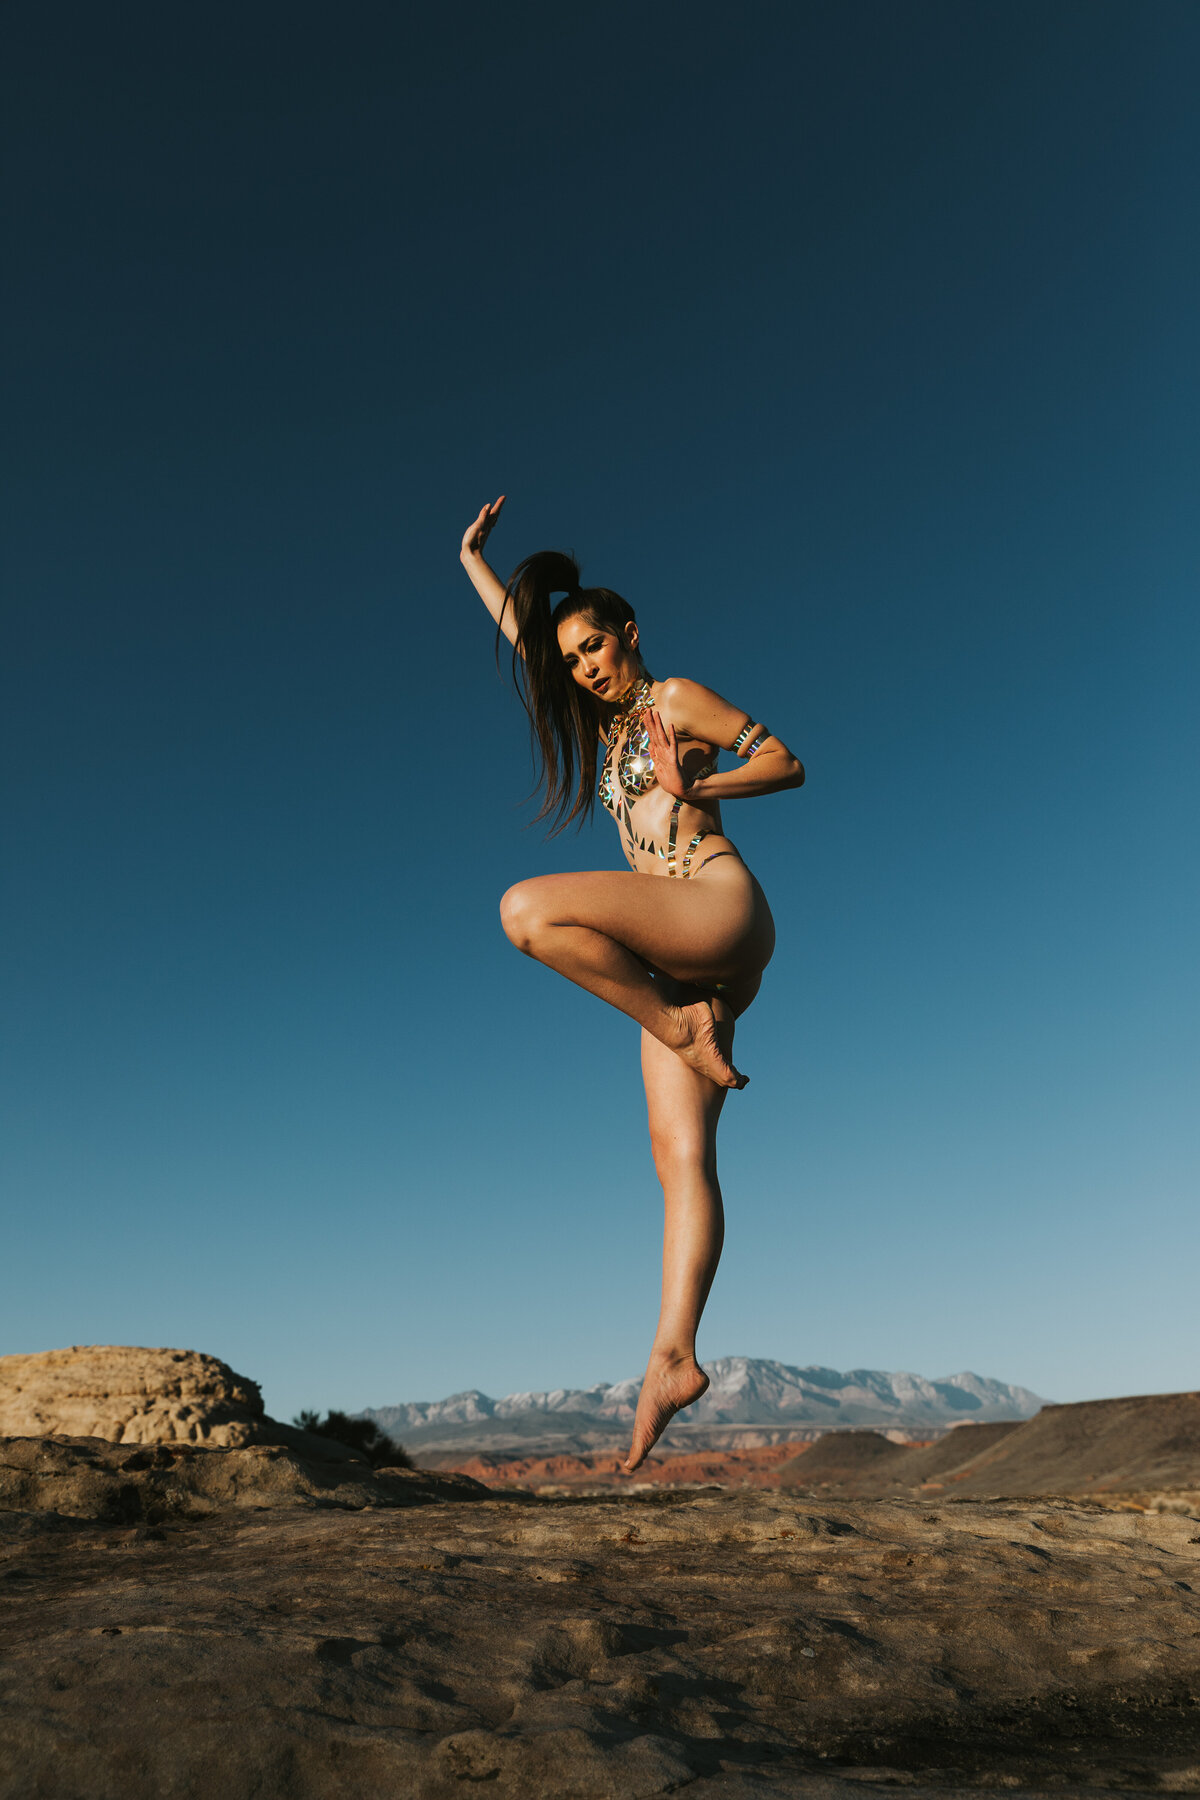 A woman is jumping high in the air while only wearing body tape to cover her.